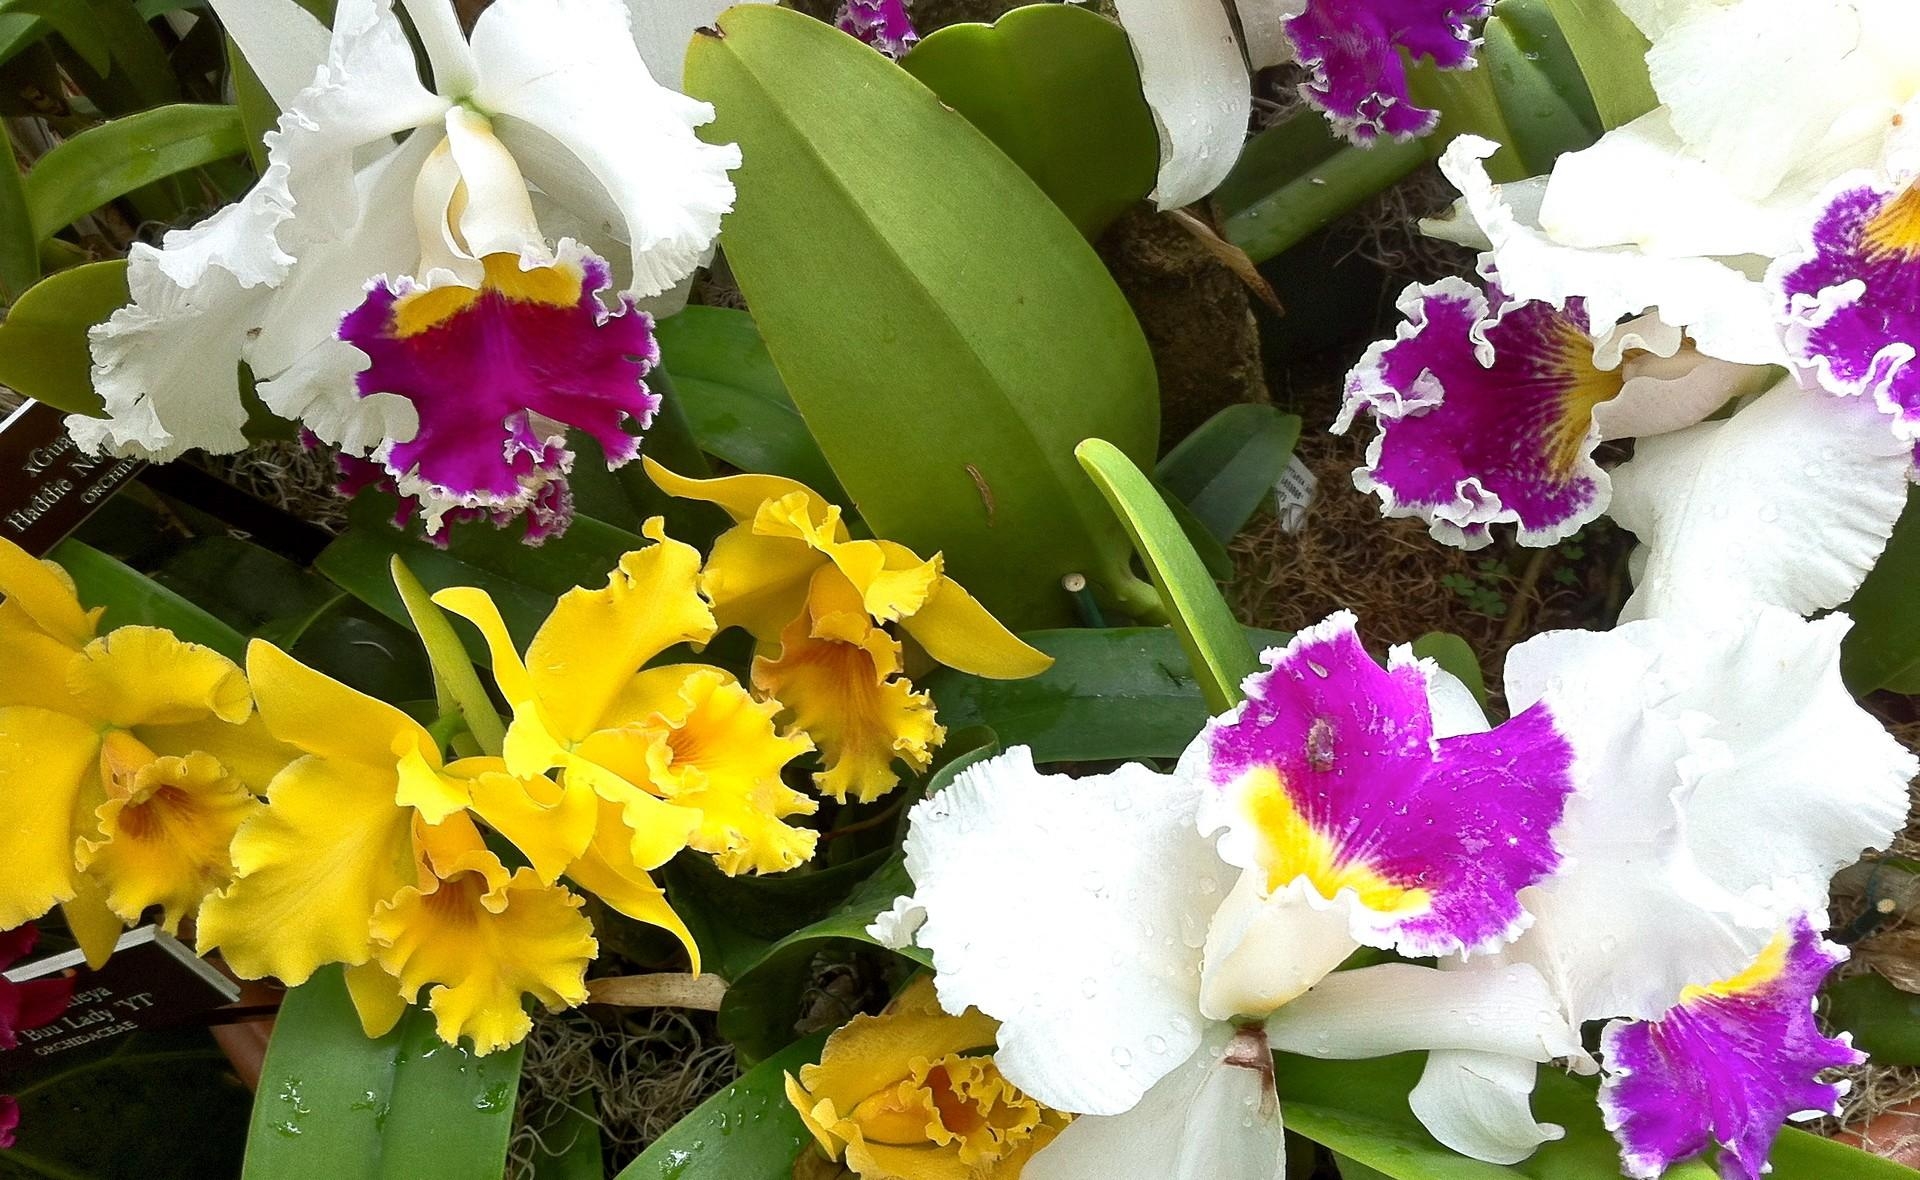 flowers, drops, close-up, greens, flower bed, flowerbed, freshness, orchids, different